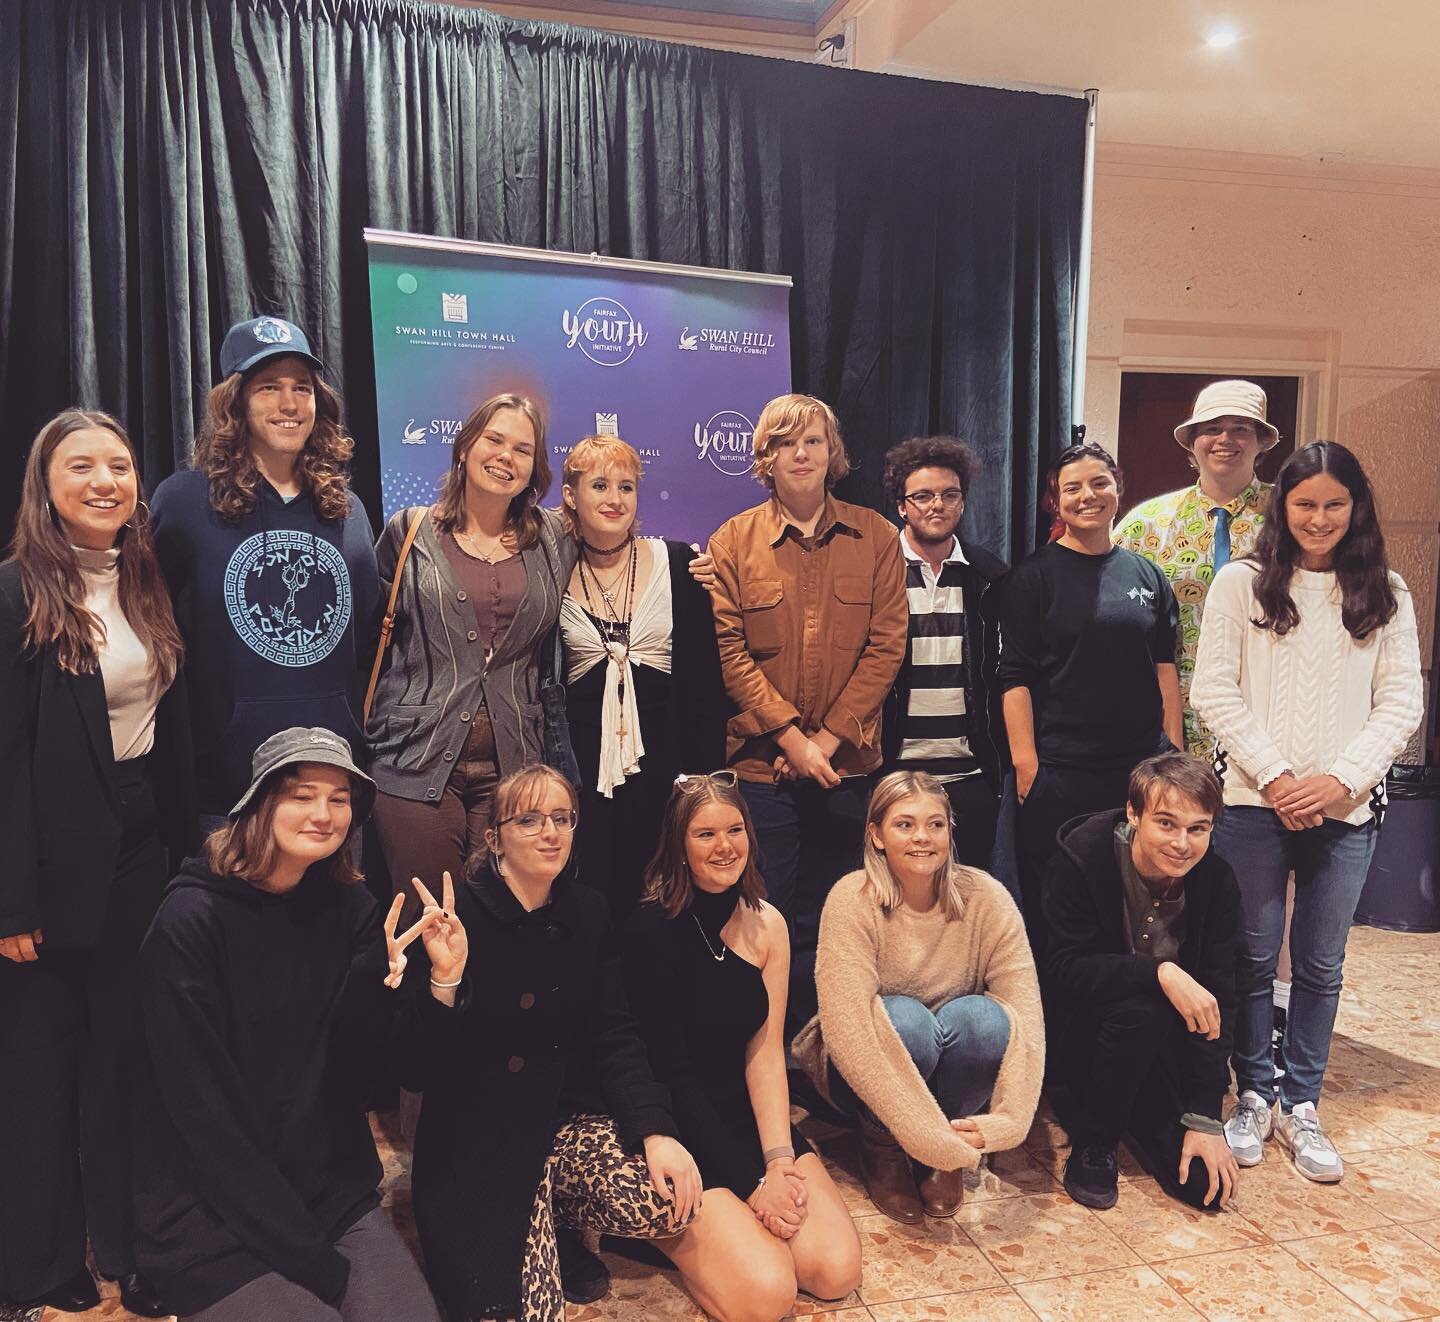 Two weeks ago, these fabulous young people shared their stories in front of 300+ at Swan Hill Town Hall at the first ever&hellip;
 🙌FYI Film Festival🙌 

What a showcase. We are so proud of this extraordinary ensemble of young artists (a few missing